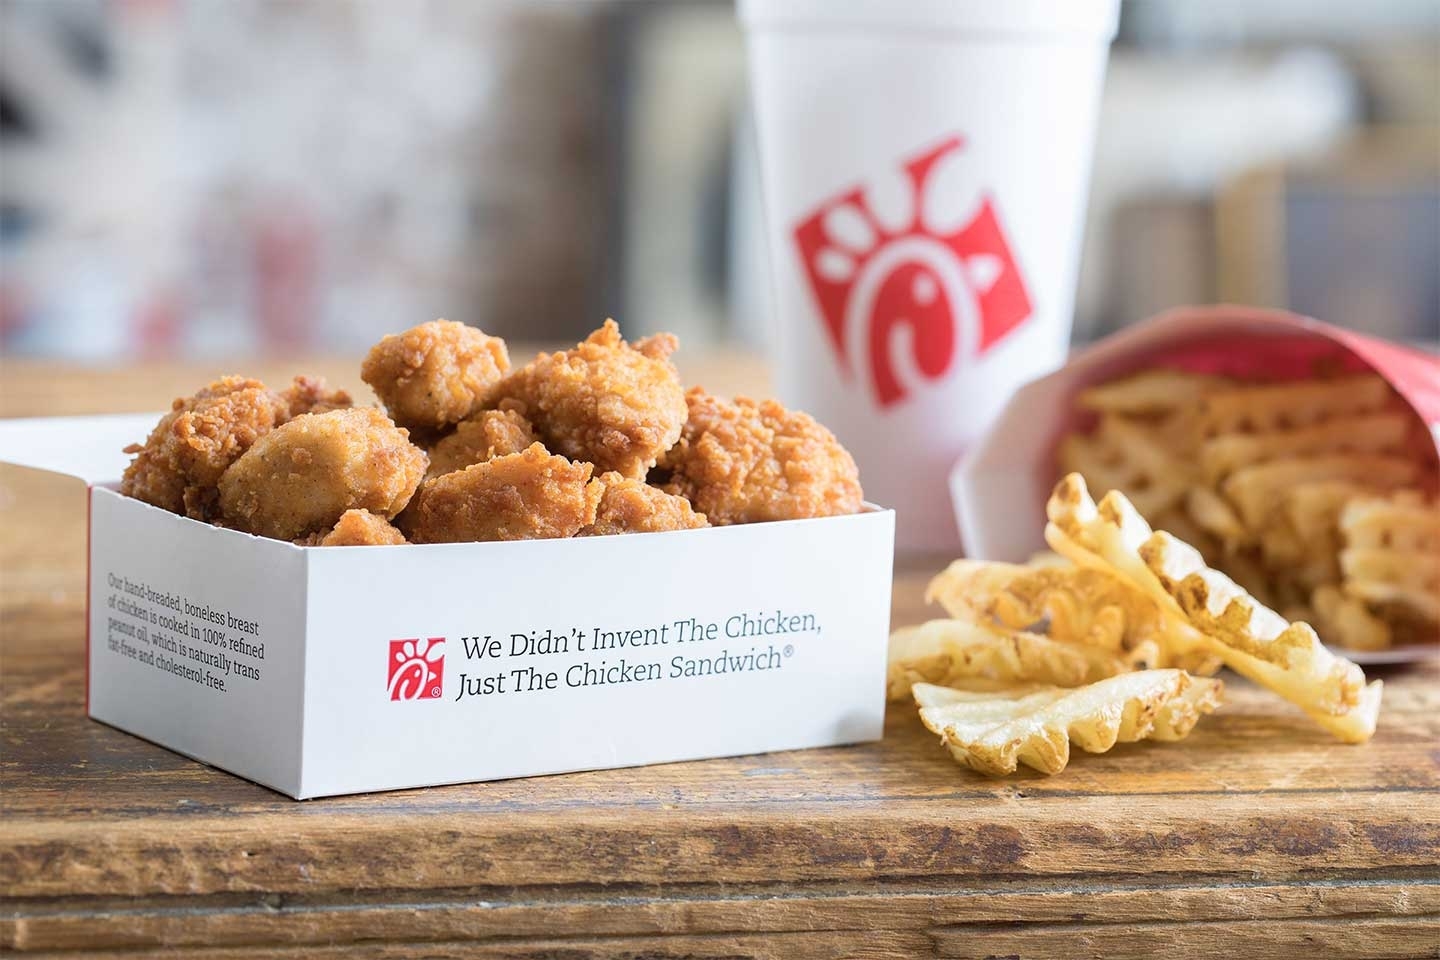 Mark Your Calendar: Free Chick-Fil-A Nuggets This January intended for Chick Fil A Calendars 2020